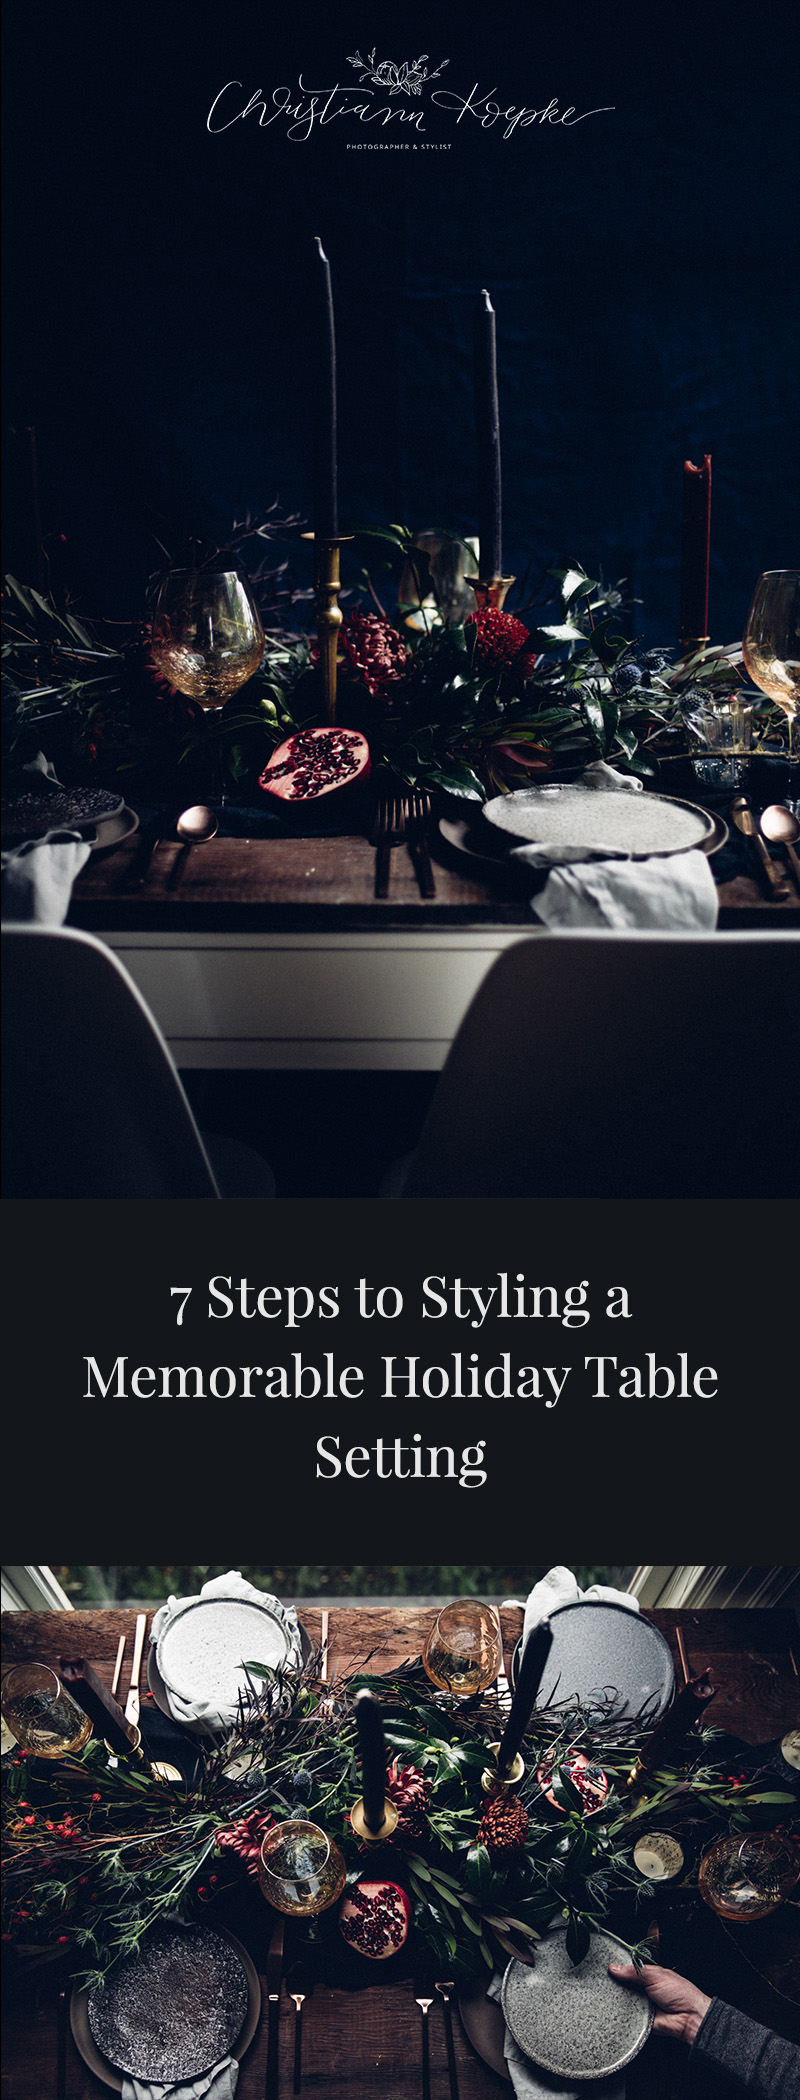 7 Steps to Styling a Memorable Holiday Table Setting | Christiann Koepke